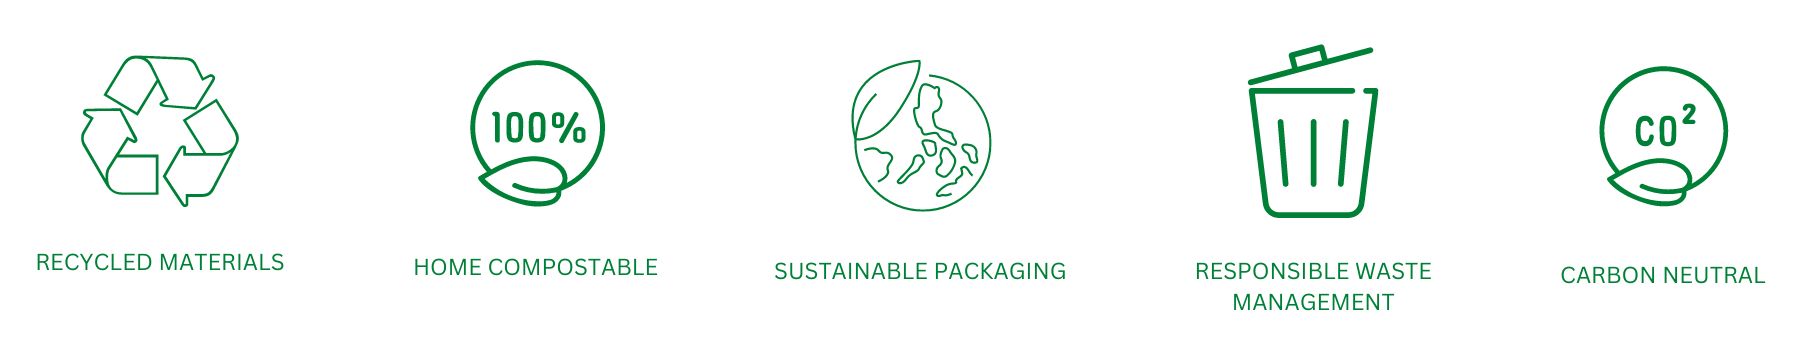 RECYCLED MATERIALS

HOME COMPOSTABLE

SUSTAINABLE PACKAGING

RESPONSIBLE WASTE MANAGEMENT 

CARBON NEUTRAL